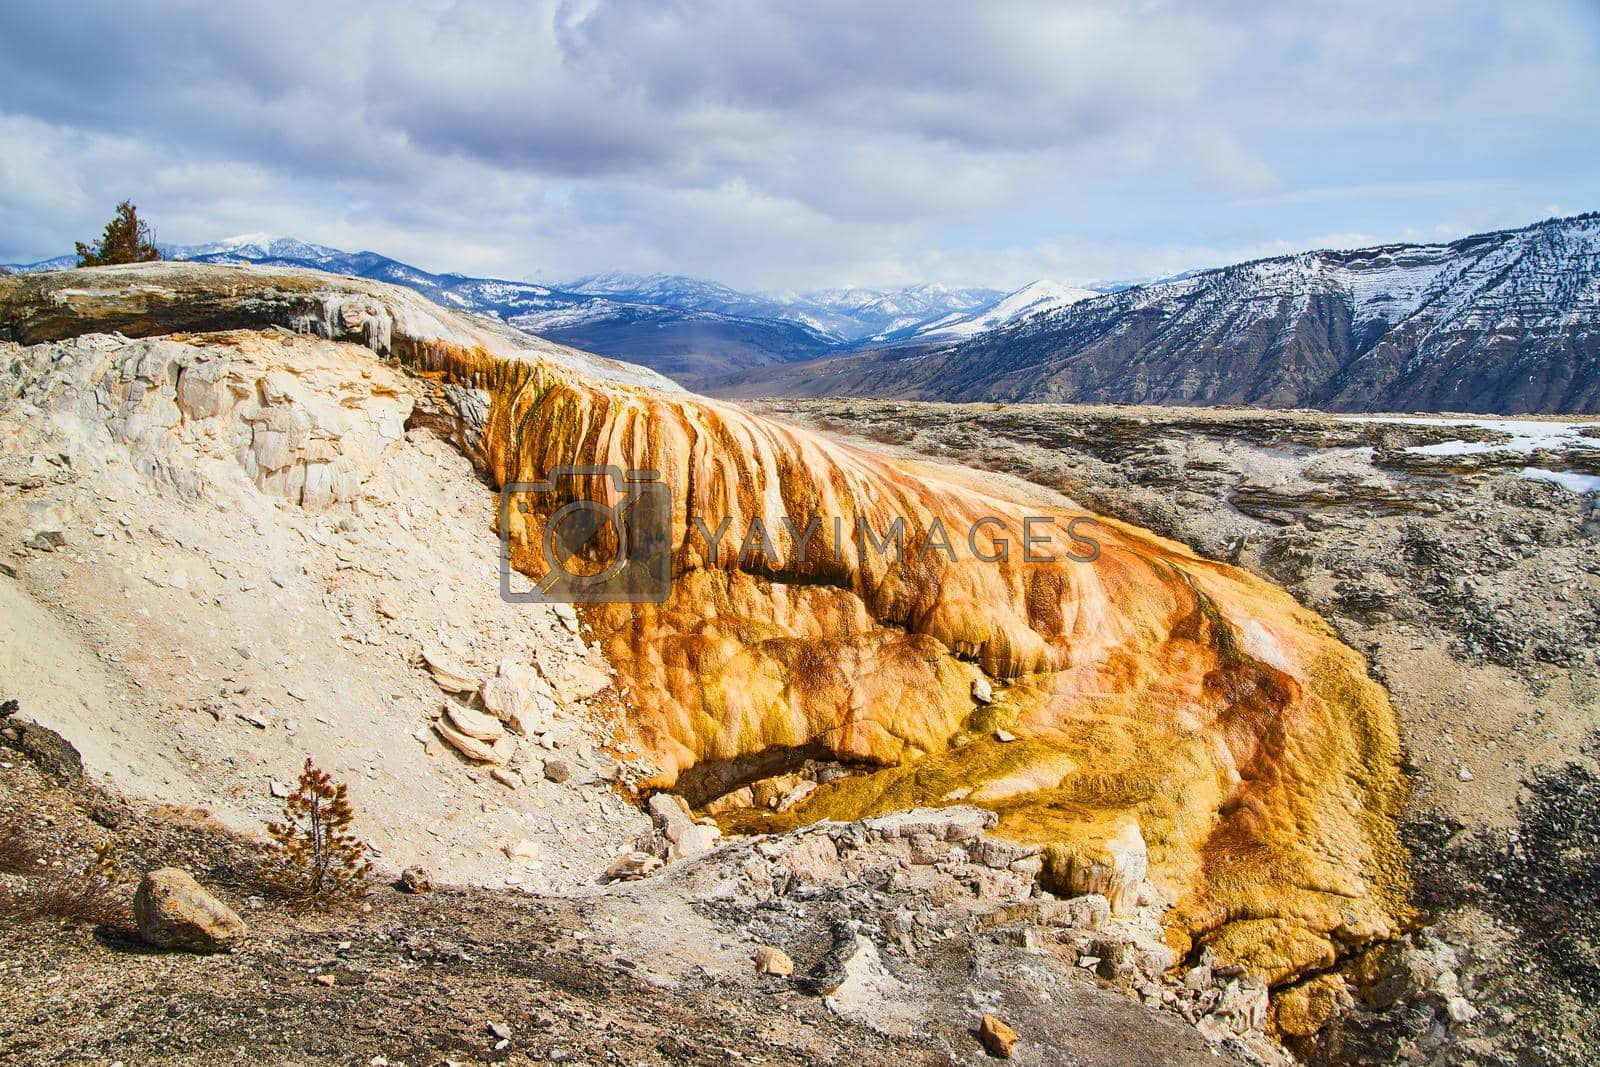 Royalty free image of Yellowstone mound of warm colors in mountains by njproductions